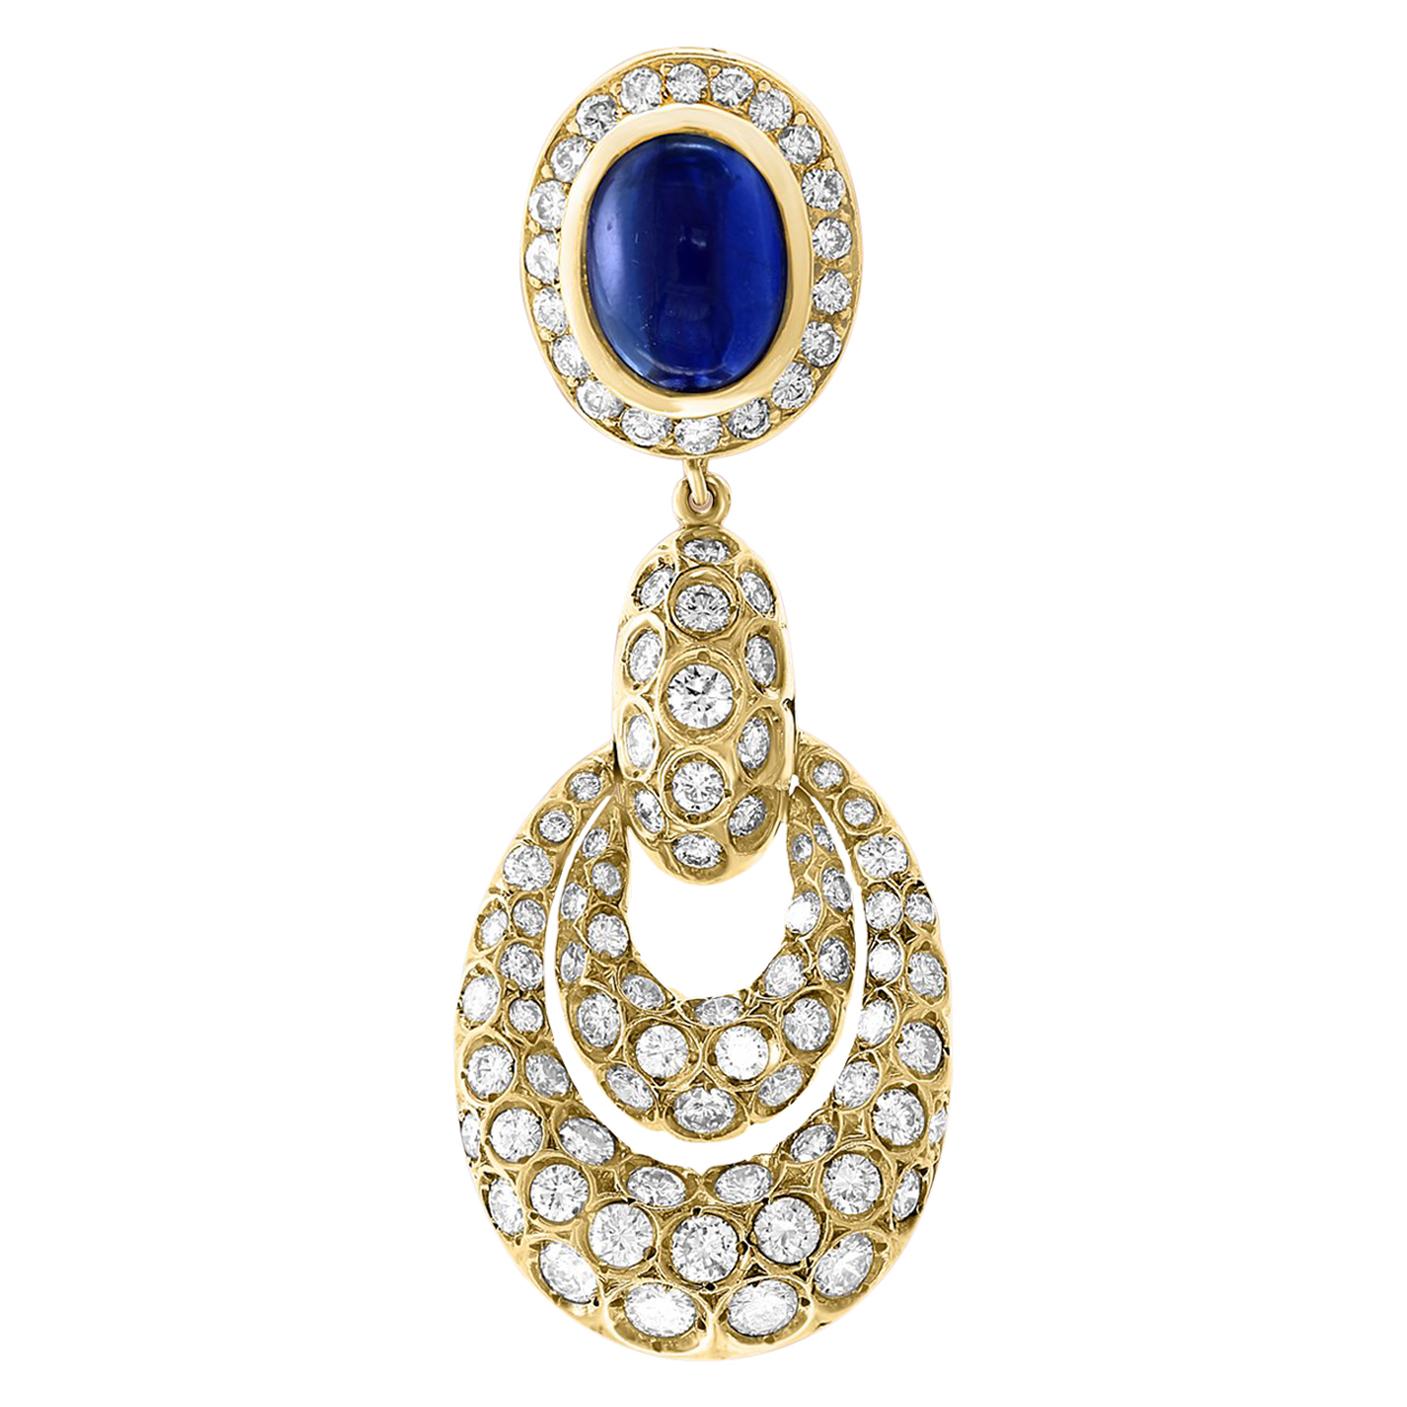 15 Carat blue Sapphire  Cabochon and Diamond Hanging/Cocktail Earring 18 Karat White Gold.
 perfect pair made in  18 carat Yellow gold . 
18 K gold 33 Grams
 Diamonds: approximate 6.5 carat , VS Quality G color
Its very hard to capture the true